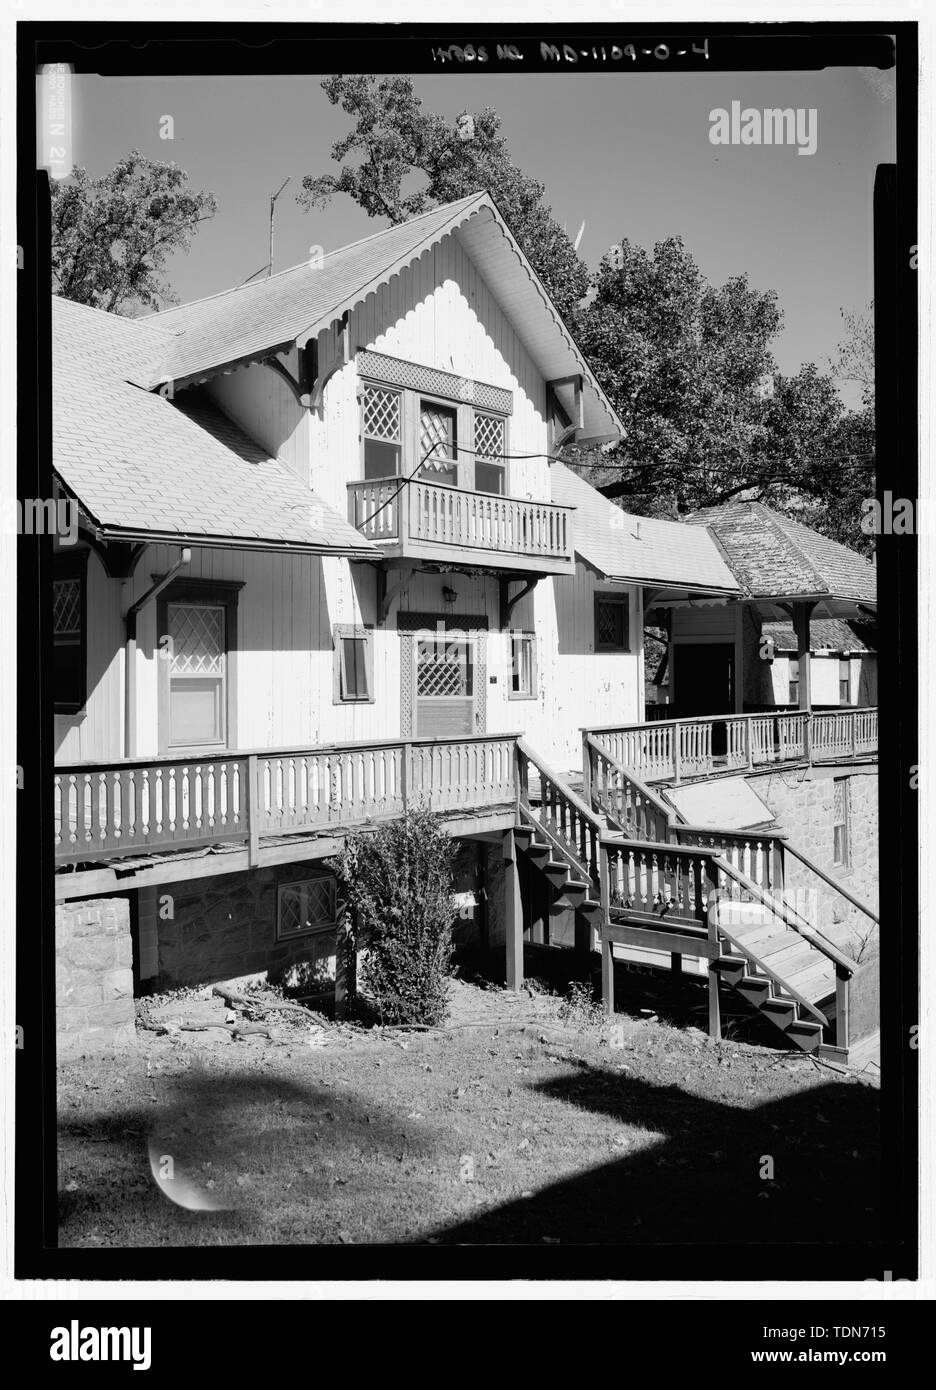 Perspective view, looking from the south, of the front elevation - National Park Seminary, Swiss Chalet, 2802 Woodstock Avenue, Silver Spring, Montgomery County, MD; Beta Eta Theta sorority; Ament, James E; Price, Virginia B, transmitter; Ott, Cynthia, historian; Boucher, Jack E, photographer; Lavoie, Catherine C, project manager; Price, Virginia B, transmitter; Price, Virginia B, transmitter; Lavoie, Catherine C, project manager Stock Photo